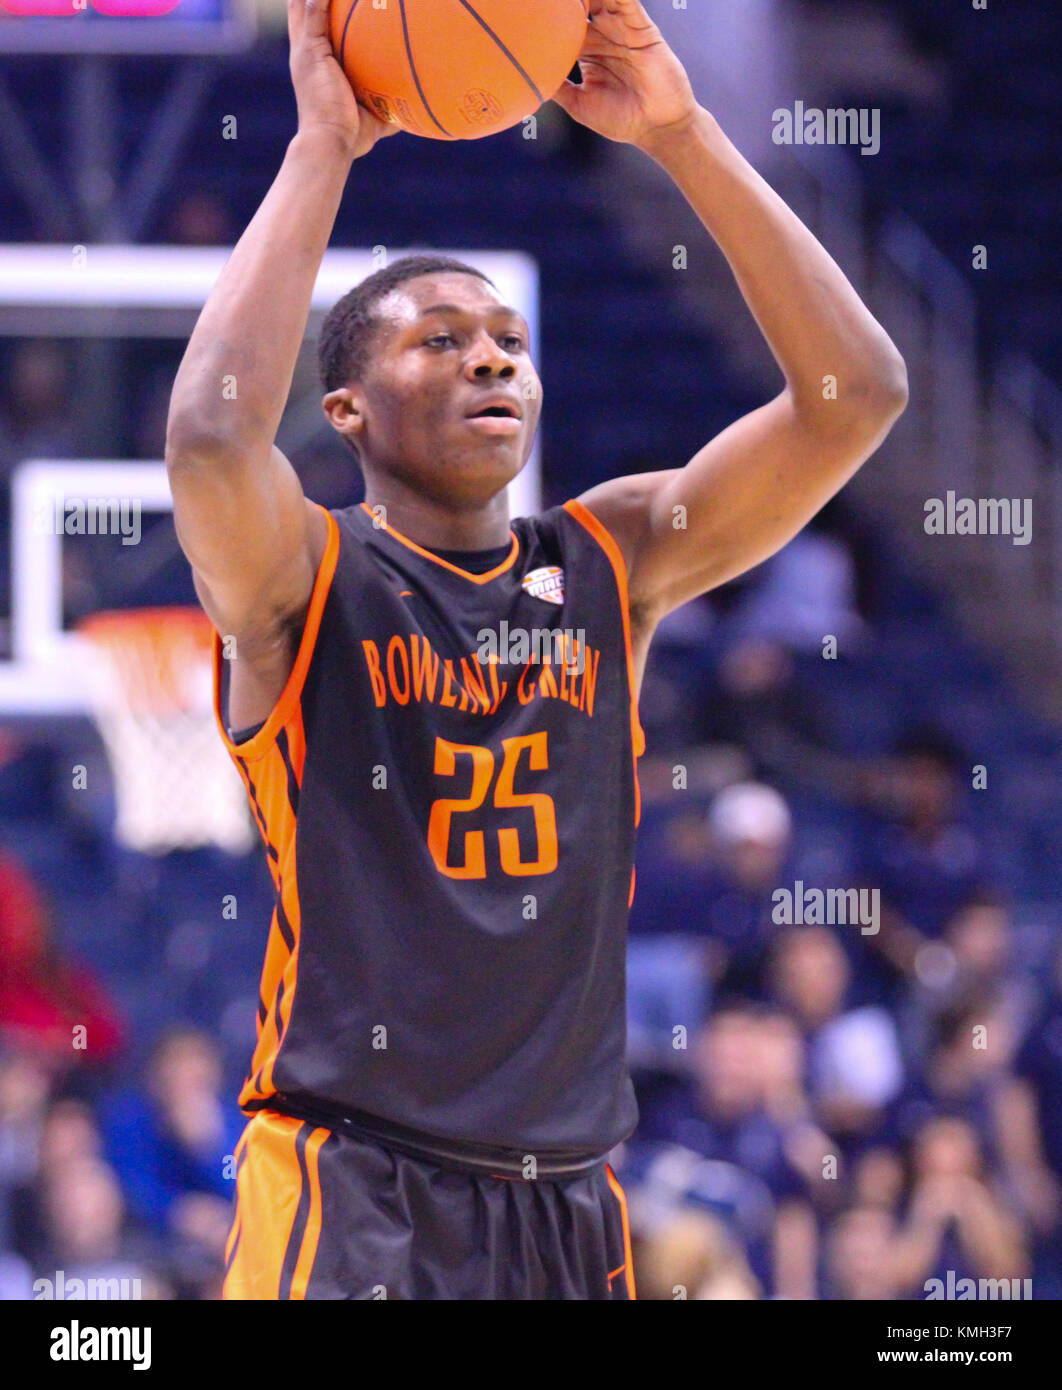 December 9, 2017 - Bowling Green Falcons guard Daeqwon Plowden (25) looks to pass the ball during the Bowling Green Falcons vs Old Dominion Monarchs game at the Ted Constant Convocation Center in Norfolk, Va. Old Dominion beat Bowling Green 88-46. Jen Hadsell/CSM Credit: Cal Sport Media/Alamy Live News Stock Photo